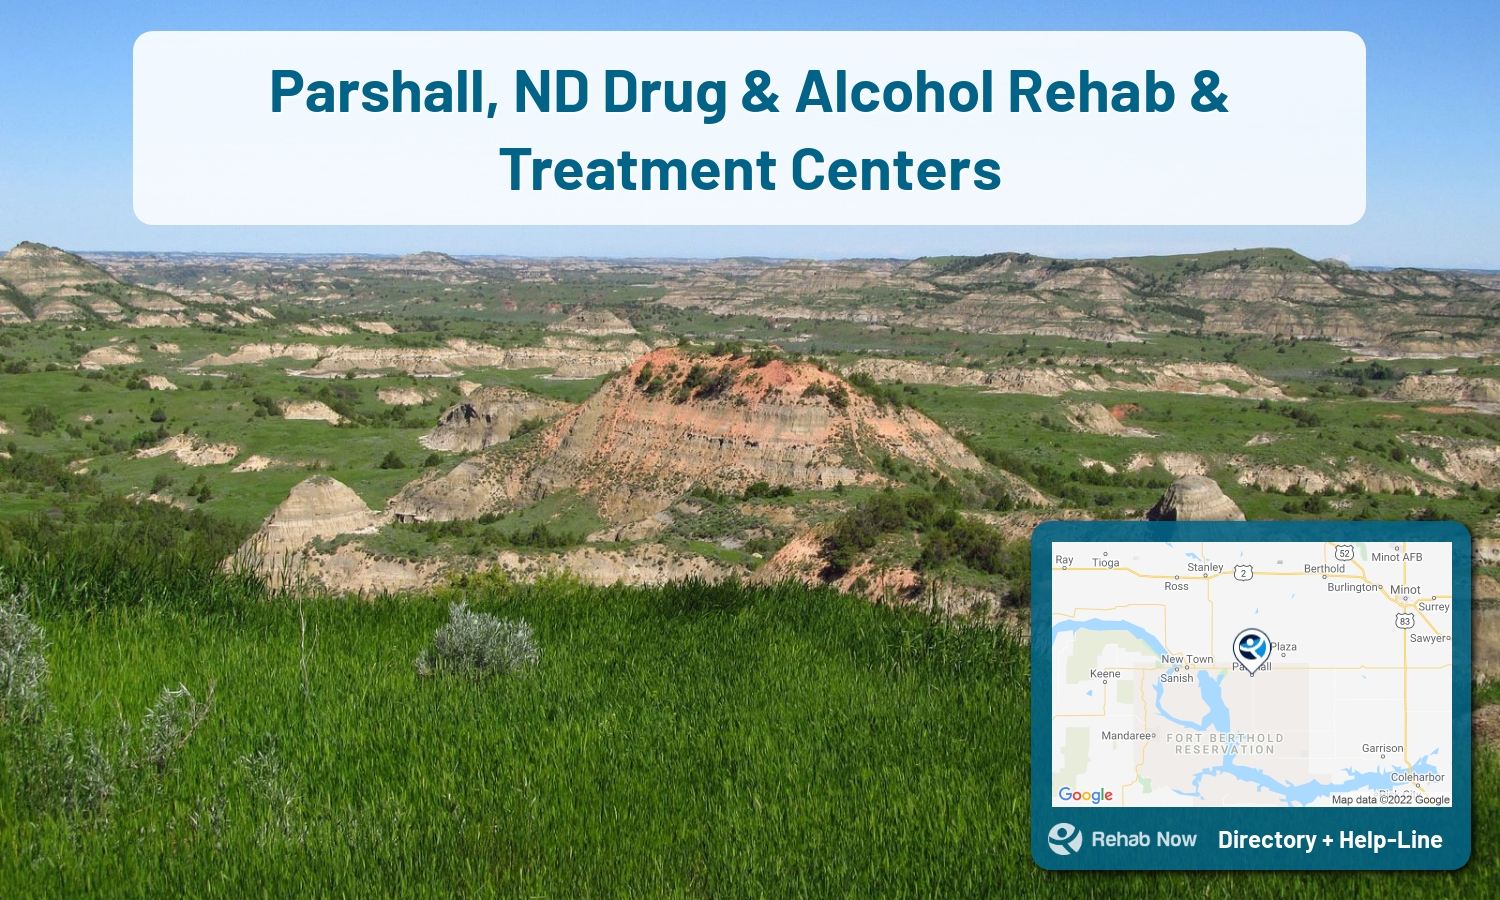 Parshall, ND Treatment Centers. Find drug rehab in Parshall, North Dakota, or detox and treatment programs. Get the right help now!